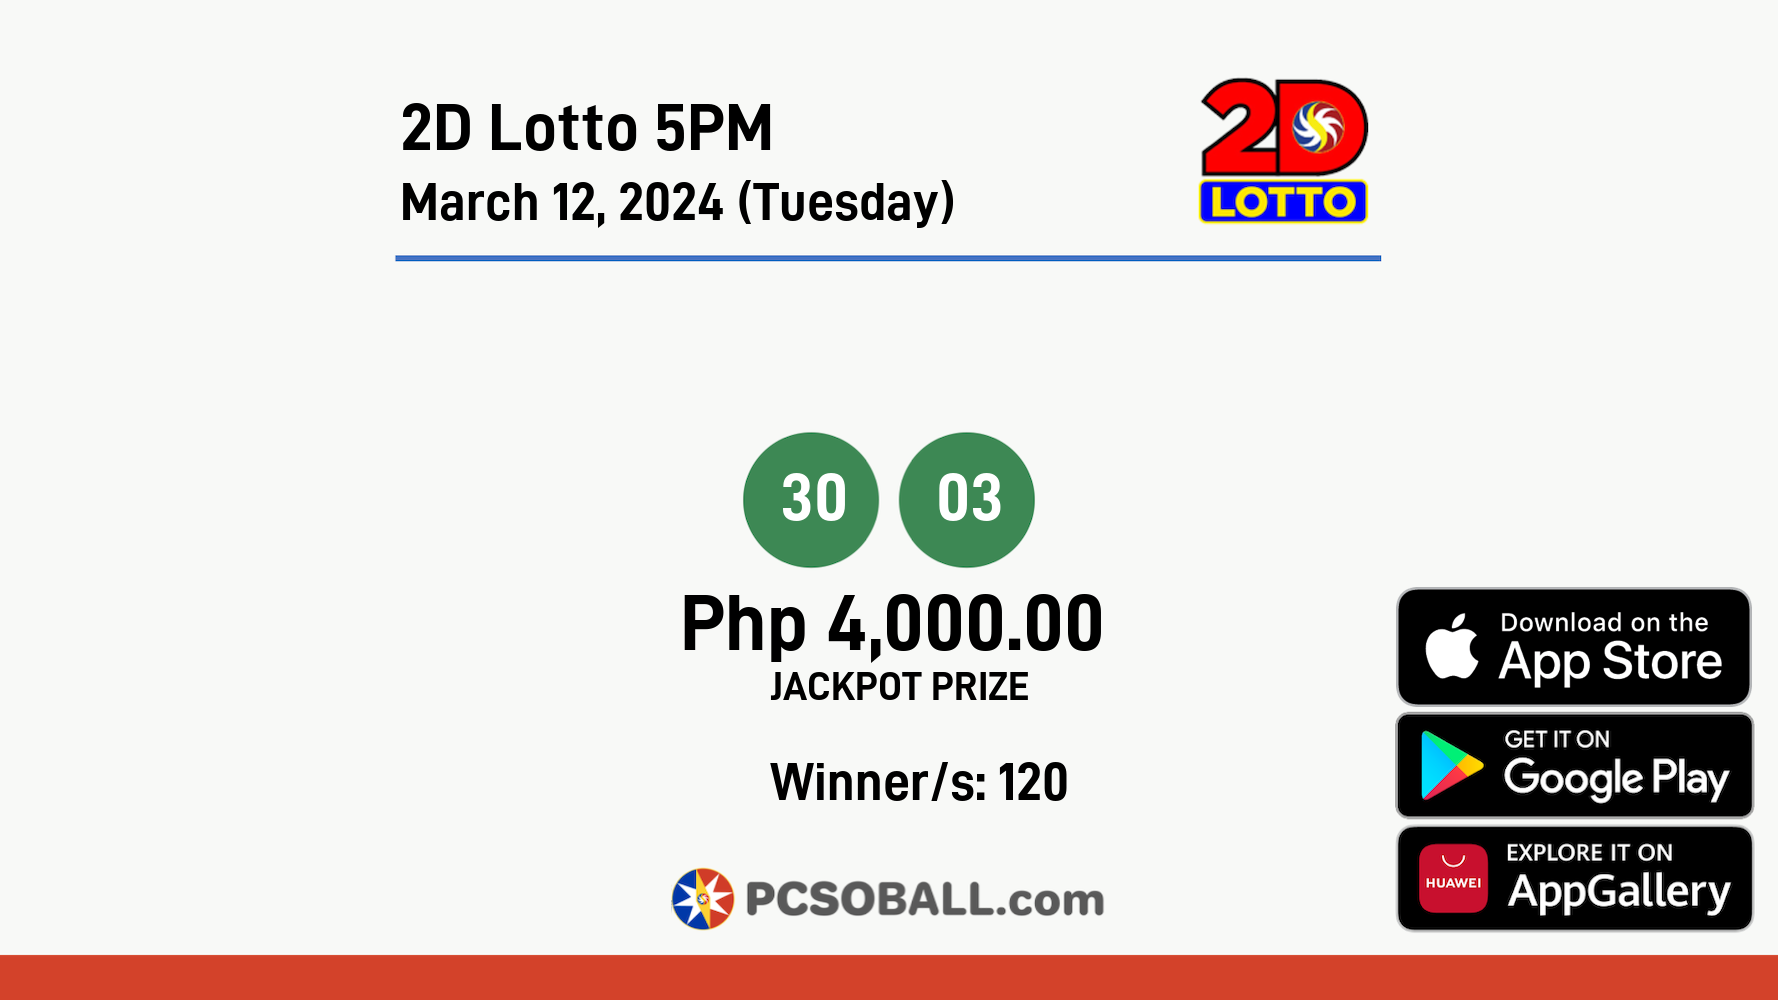 2D Lotto 5PM March 12, 2024 (Tuesday) Result